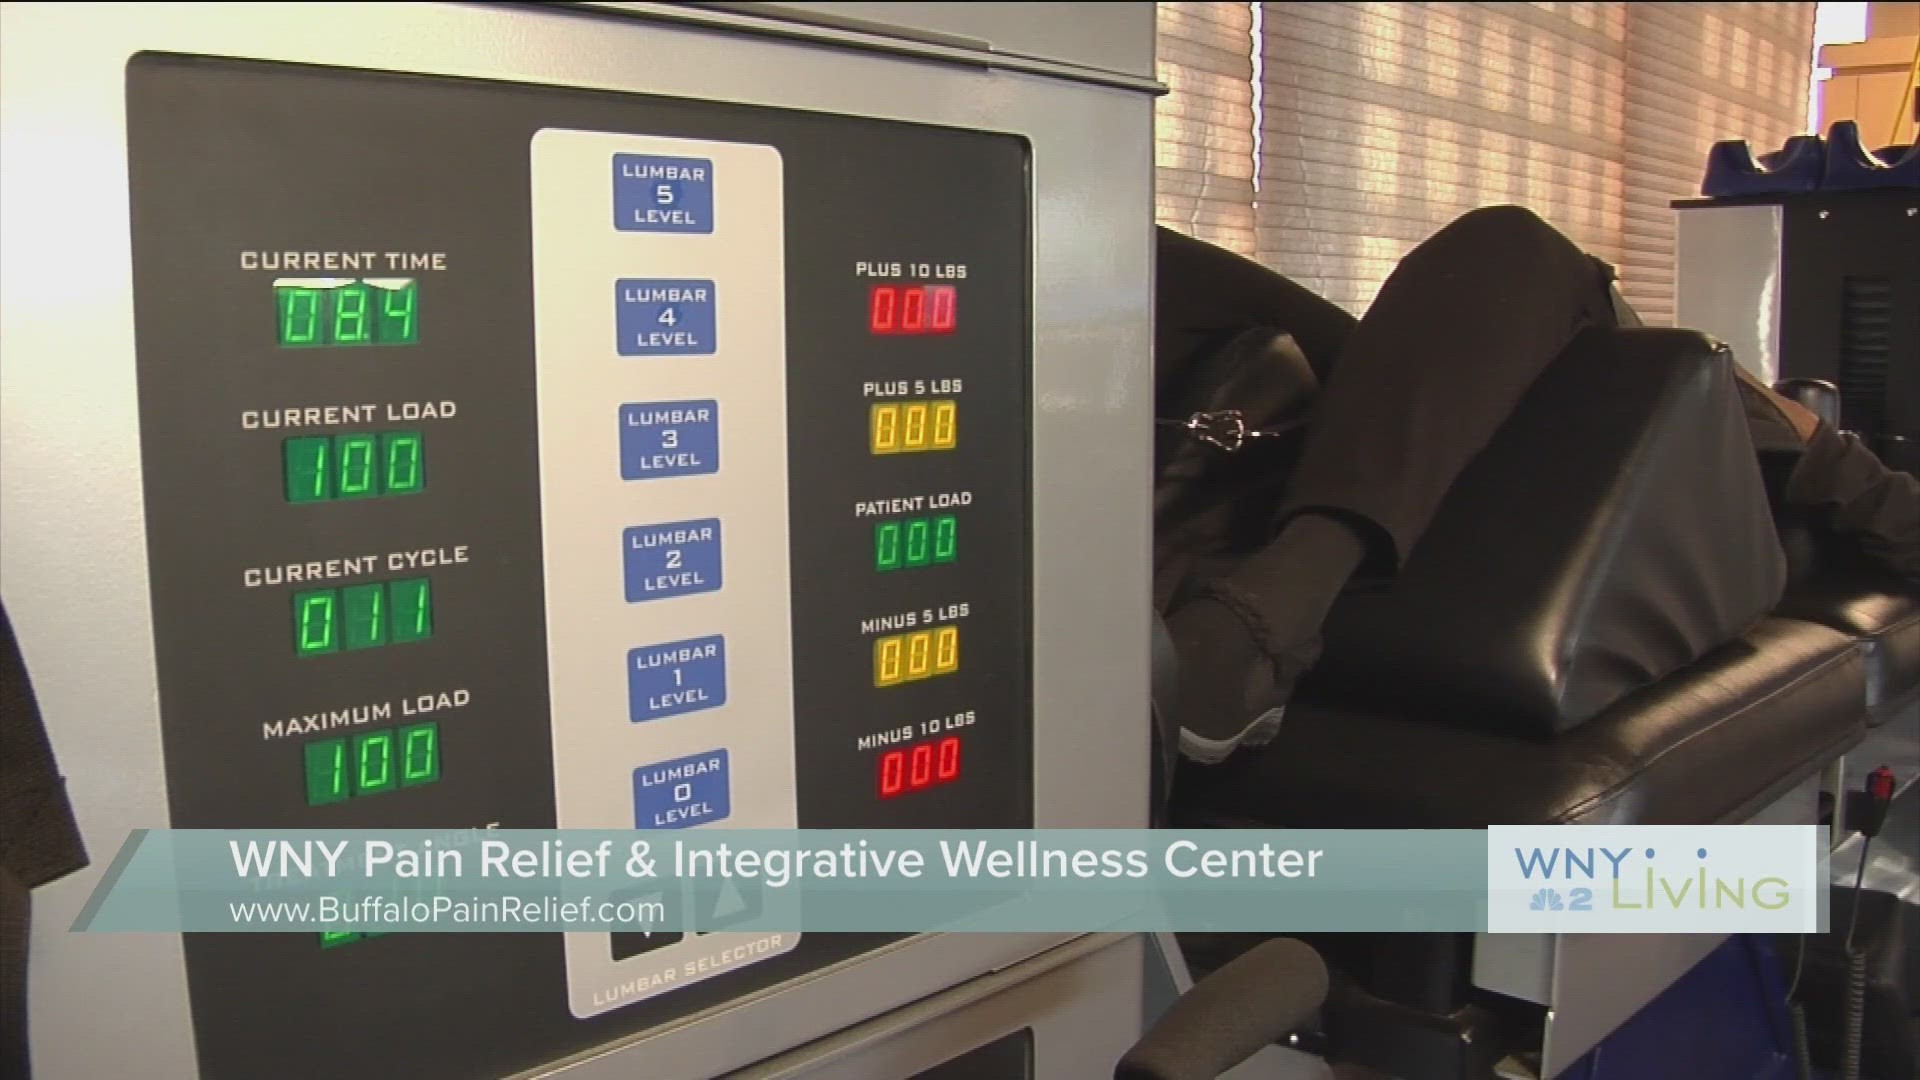 WNY Living- April 20th- WNY Pain Relief & Integrative Wellness Center (THIS VIDEO IS SPONSORED BY WNY PAIN RELIEF & INTEGRATIVE WELLNESS CENTER)